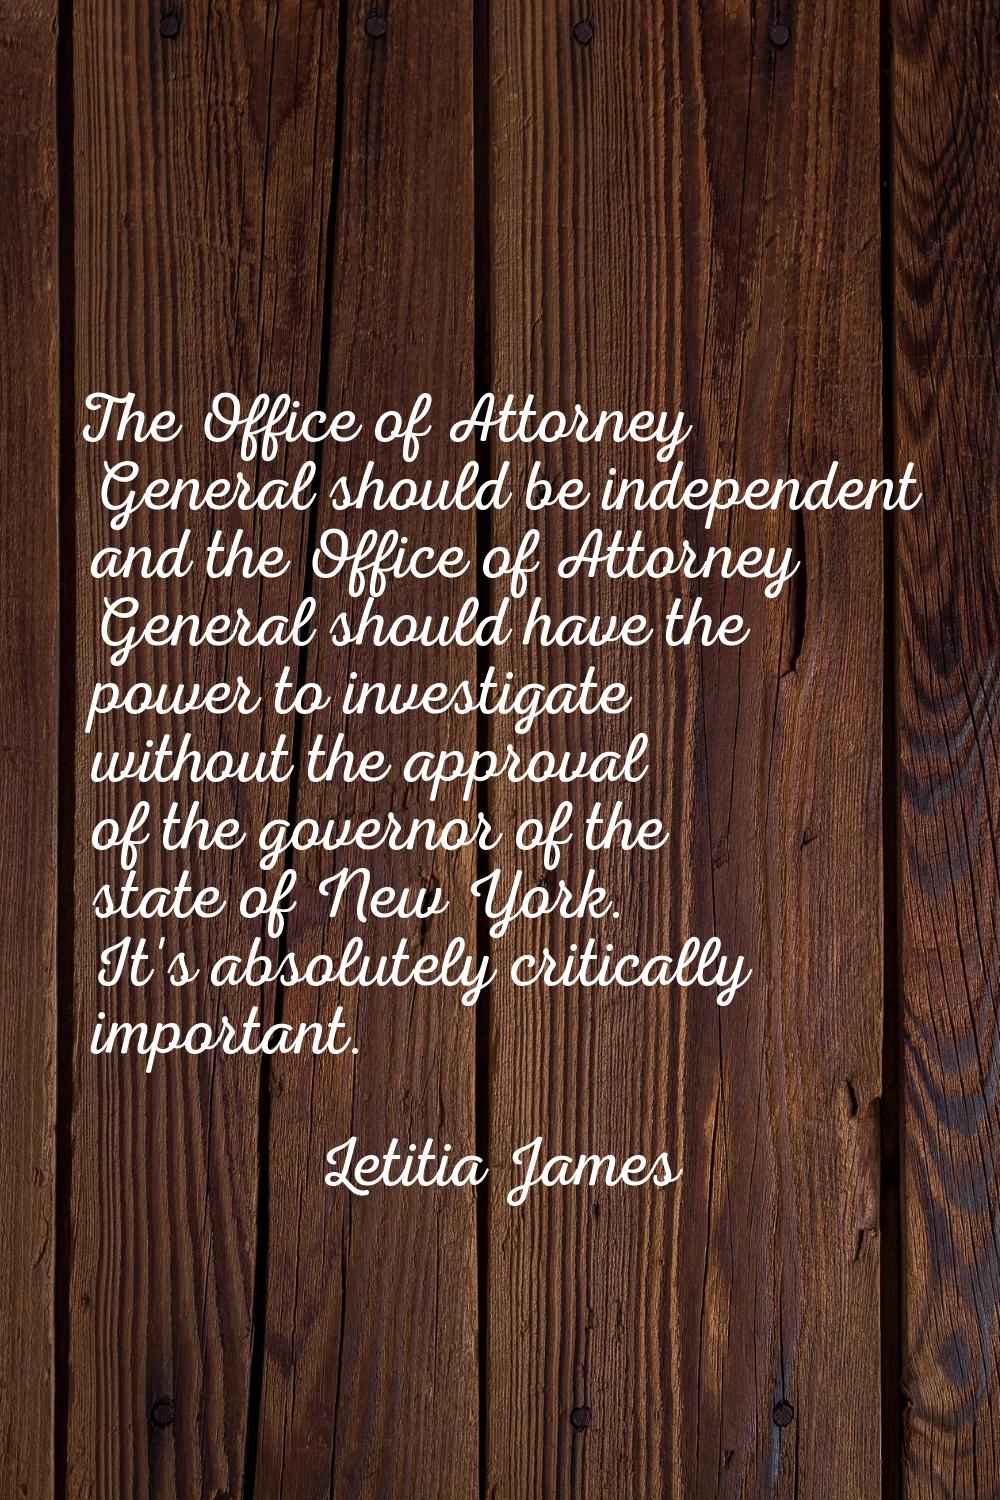 The Office of Attorney General should be independent and the Office of Attorney General should have